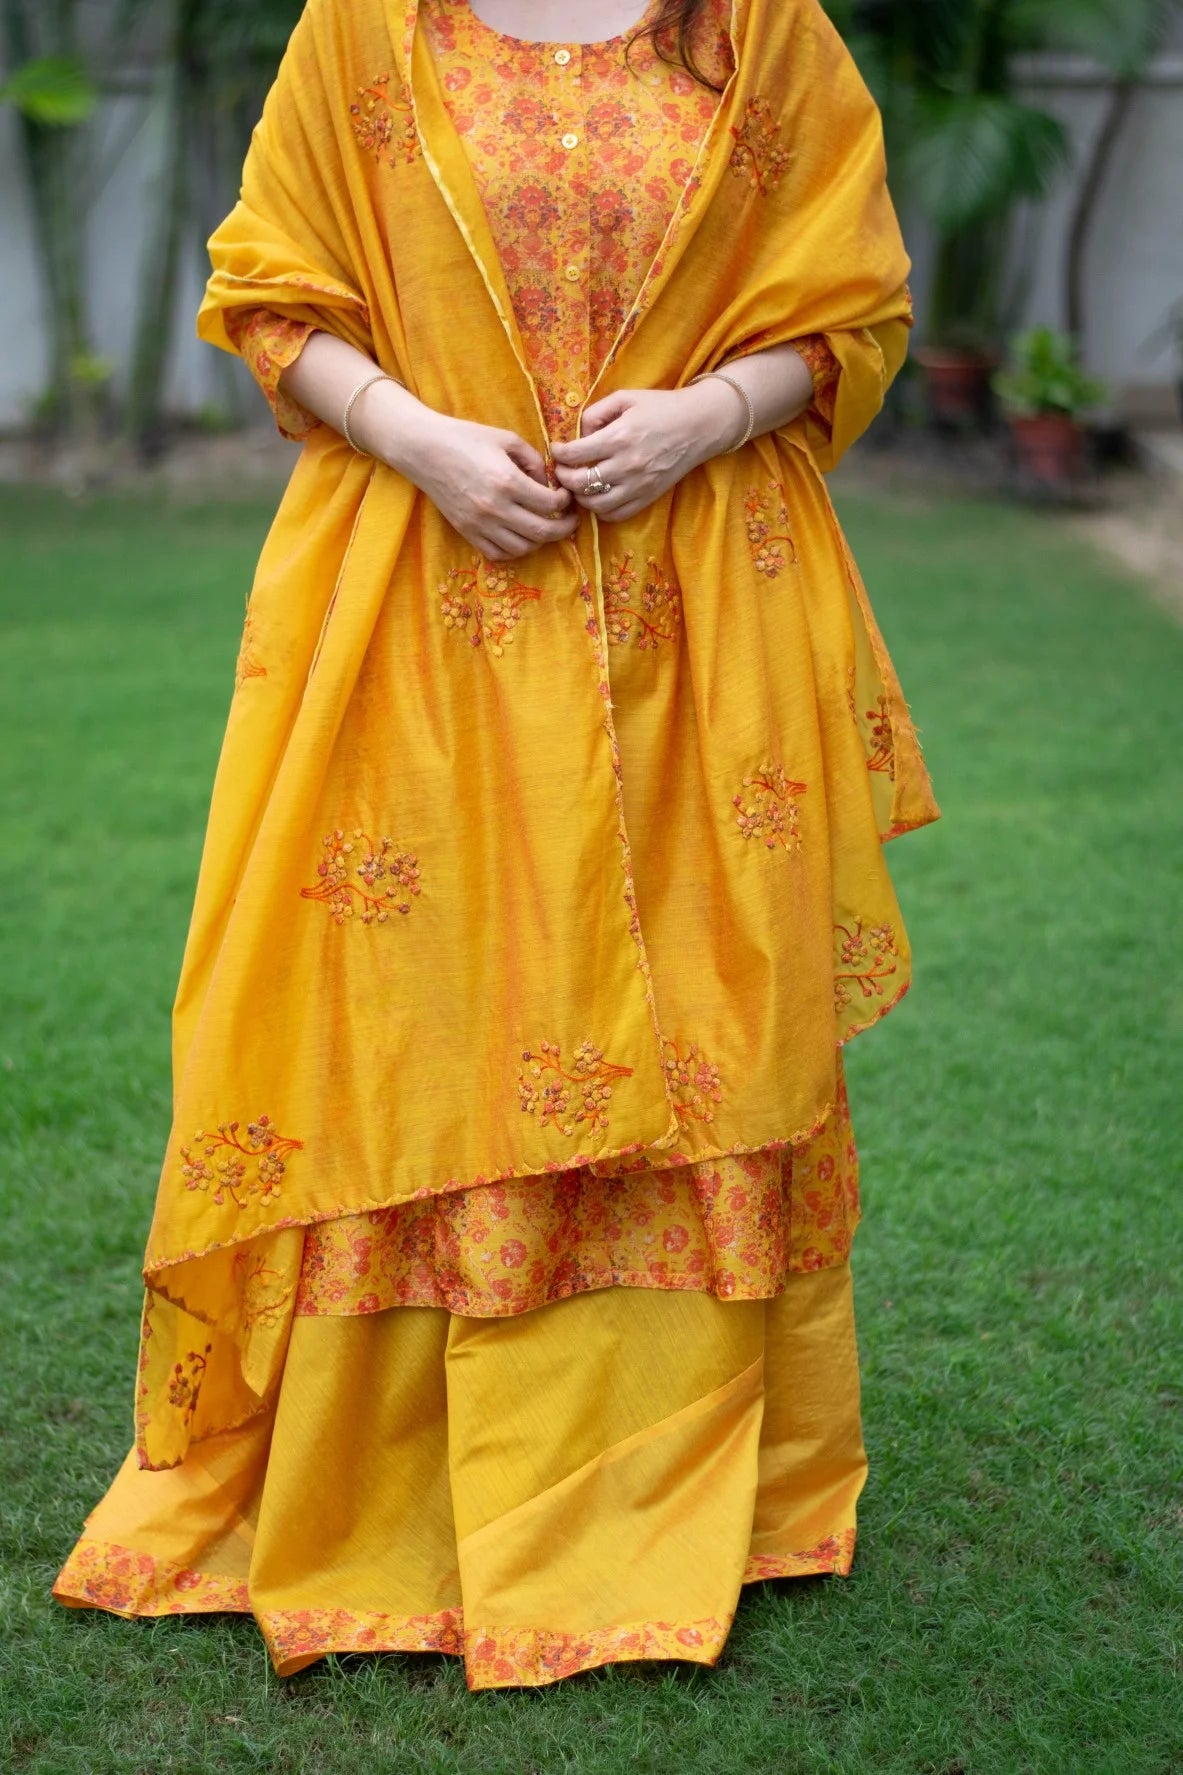 This yellow Chanderi Kurta features delicate lacework on the sleeves.